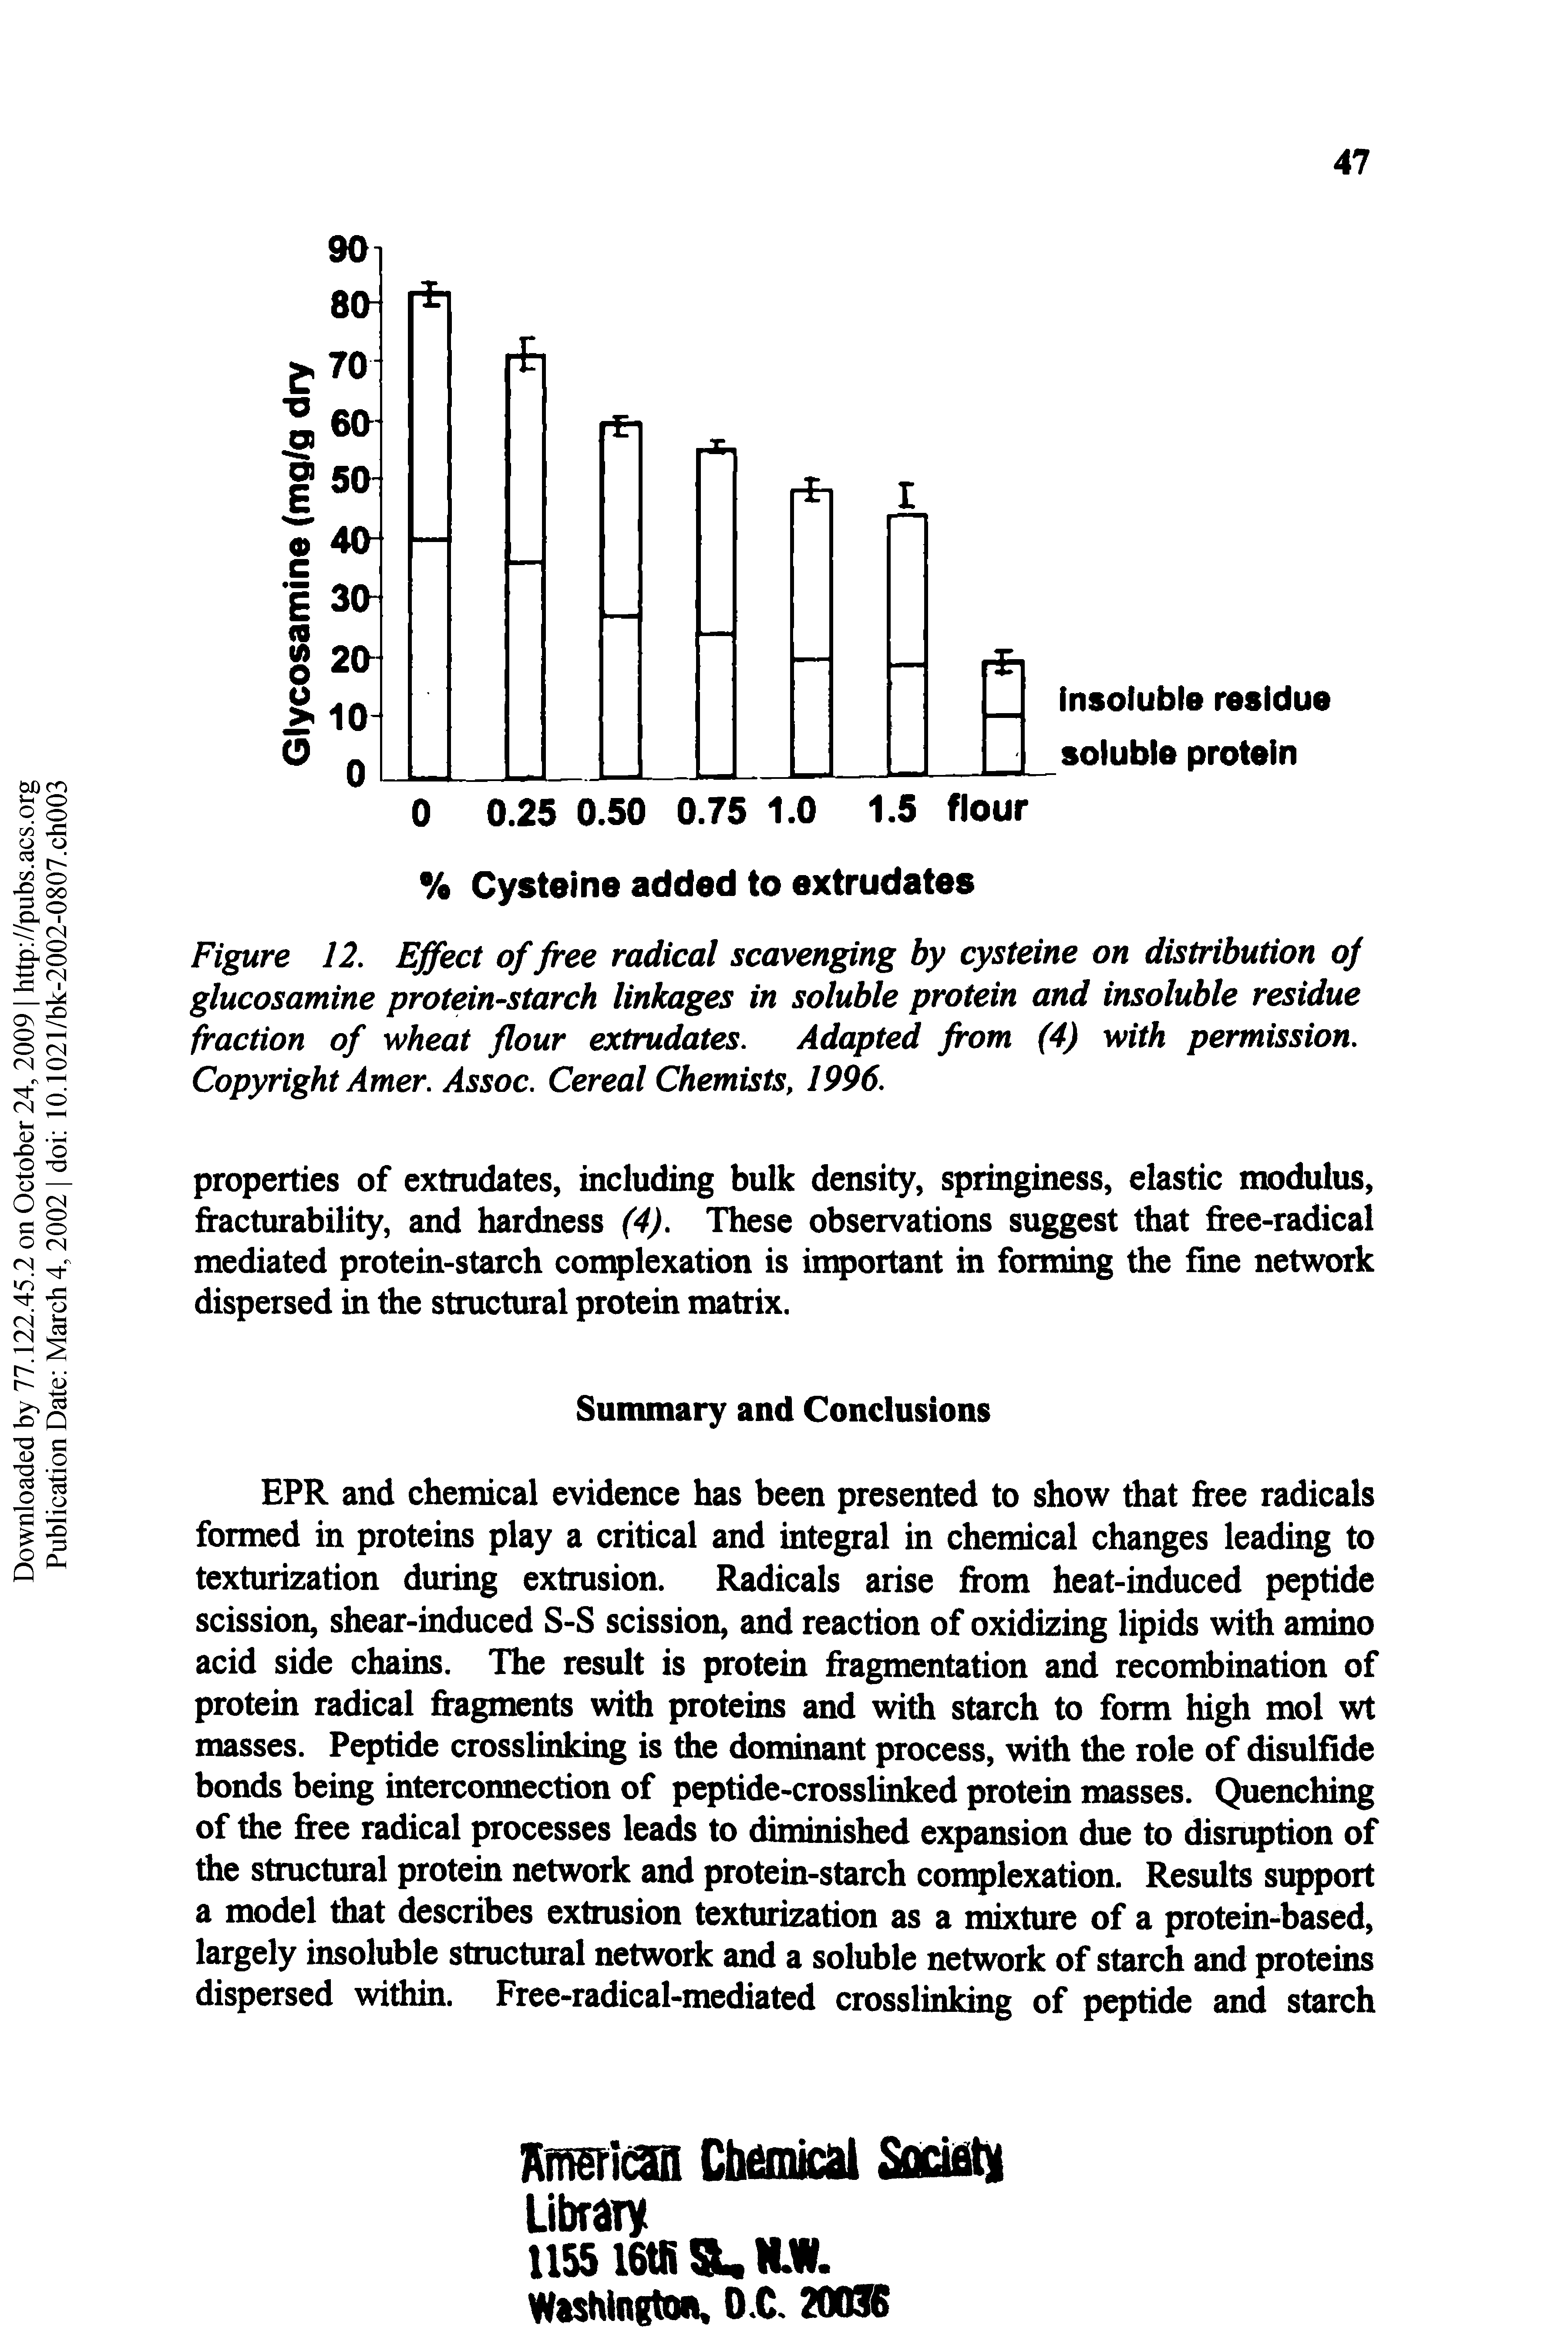 Figure 12. Effect of free radical scavenging by cysteine on distribution of glucosamine protein-starch linkages in soluble protein and insoluble residue fraction of wheat flour extrudates. Adapted from (4) with permission. Copyright Amer. Assoc. Cereal Chemists, 1996.